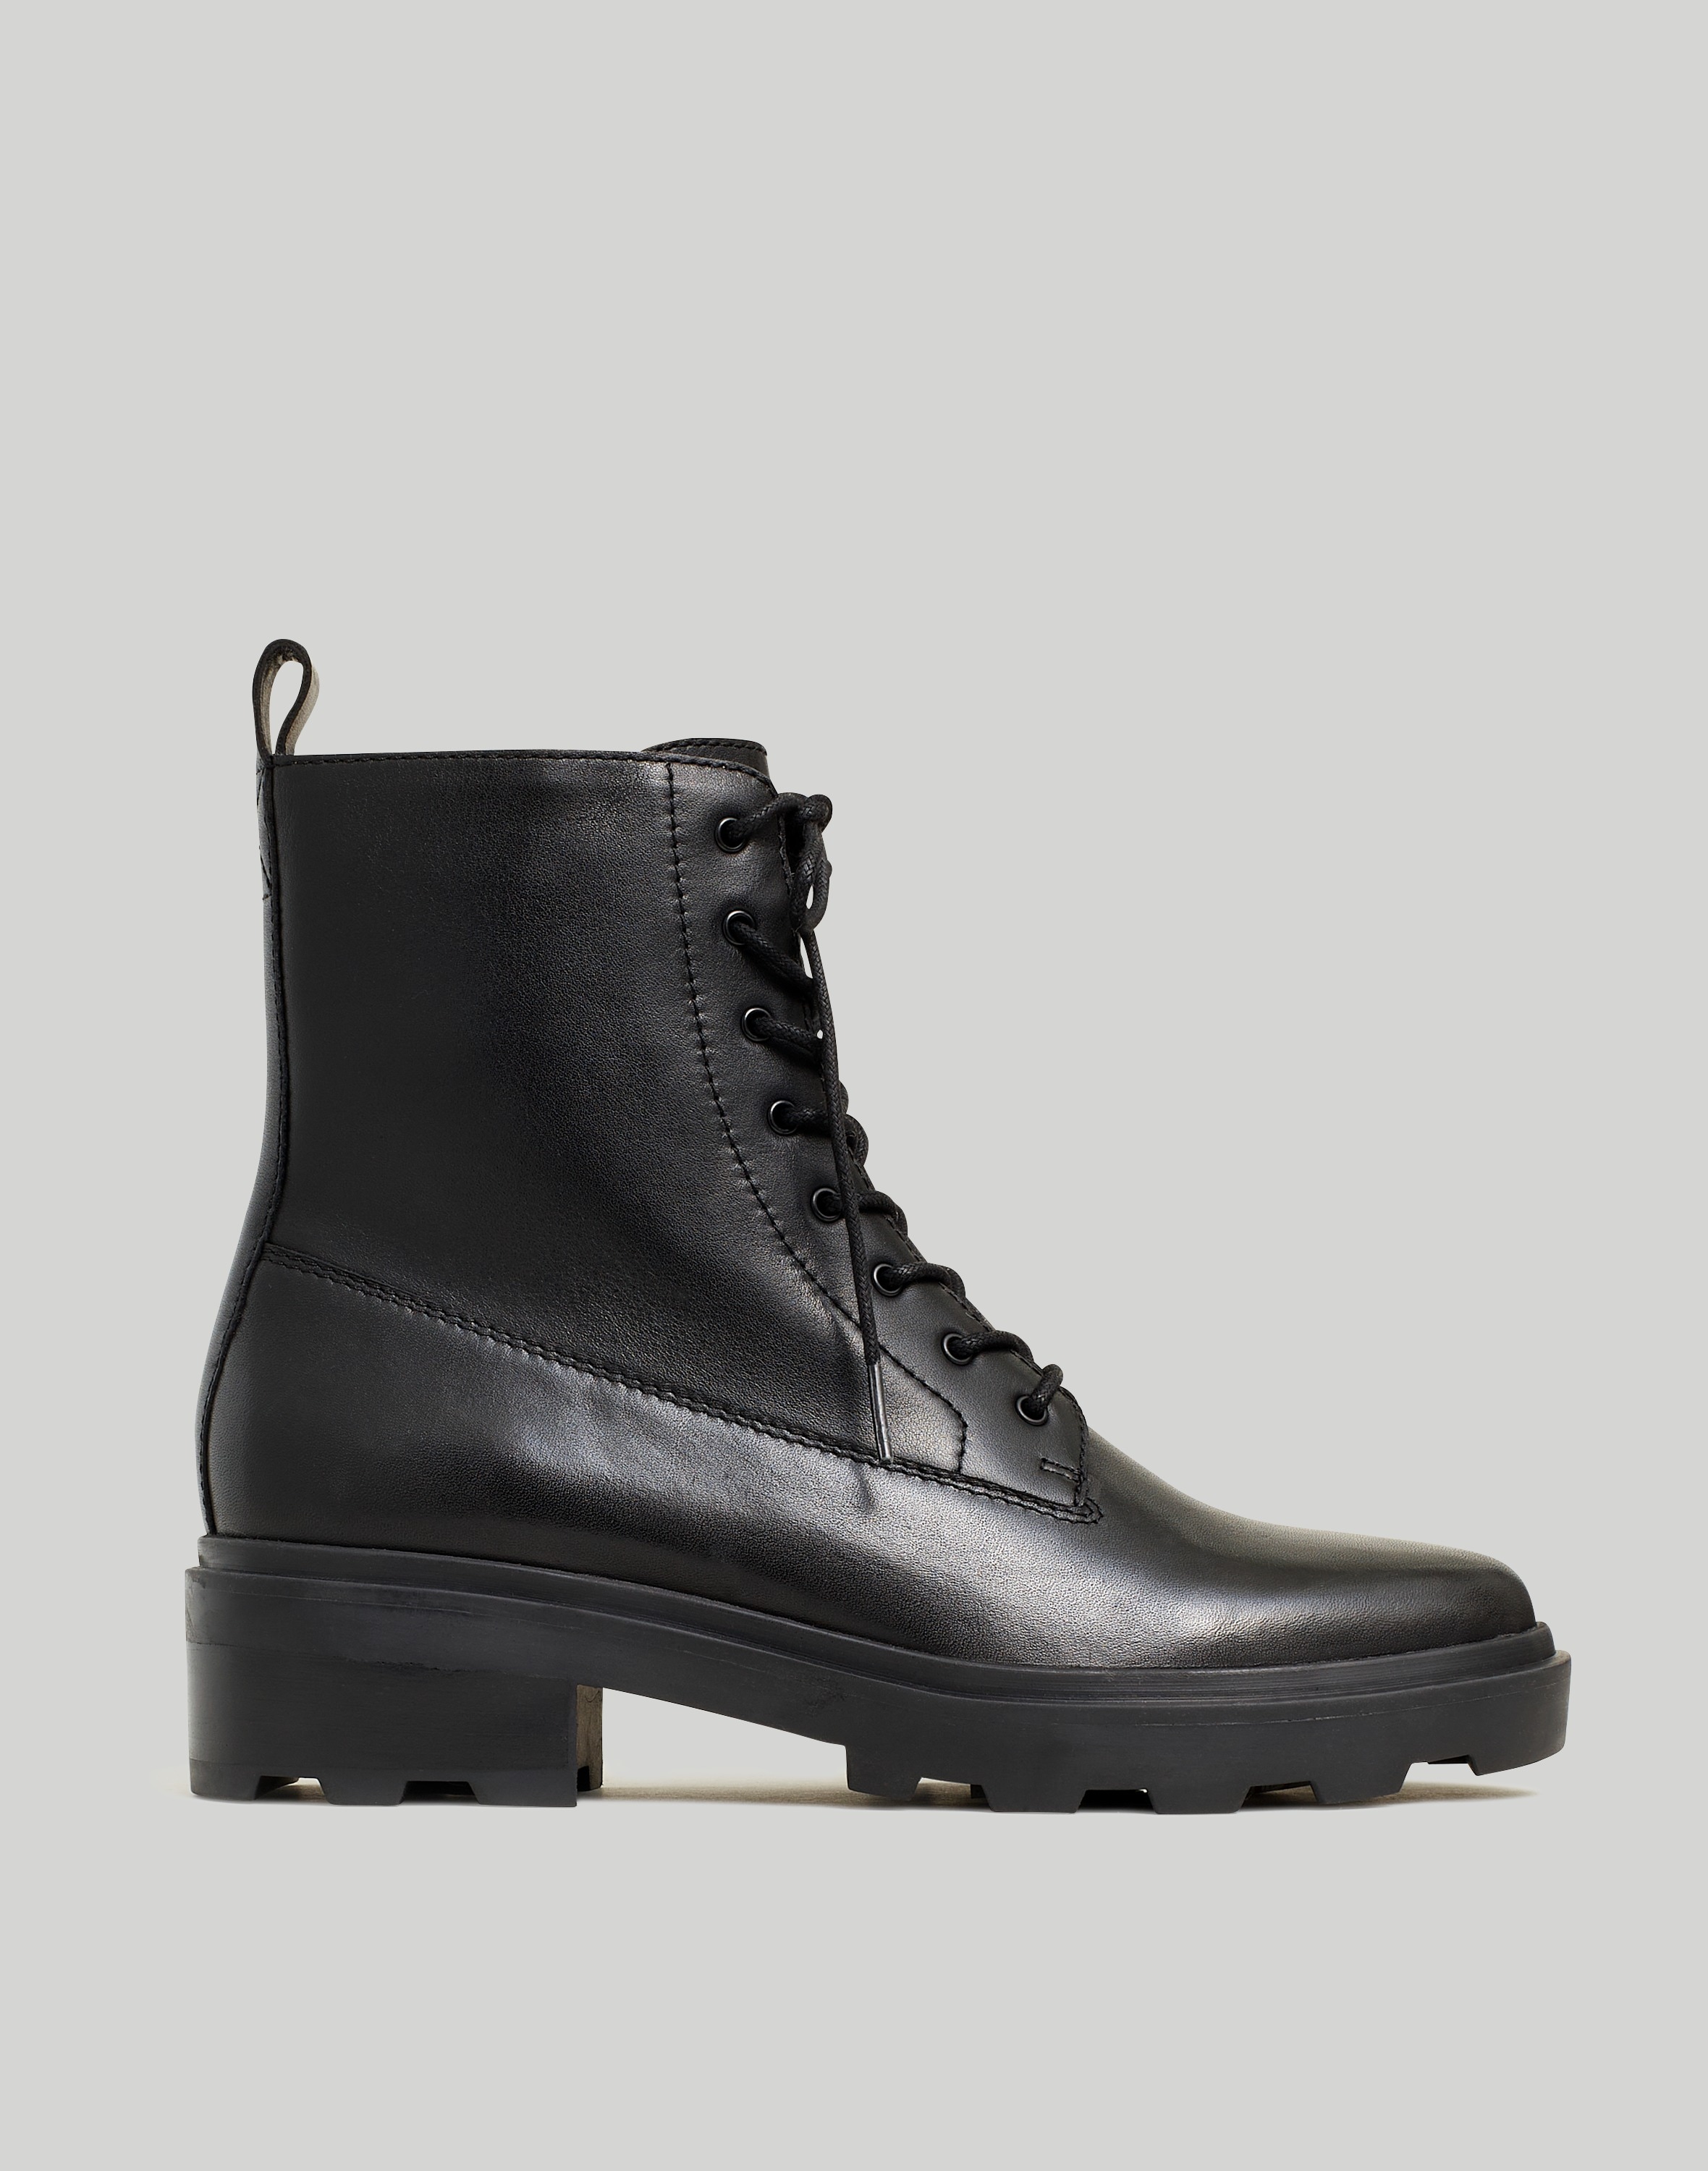 The Shelton Lace-Up Boot Leather